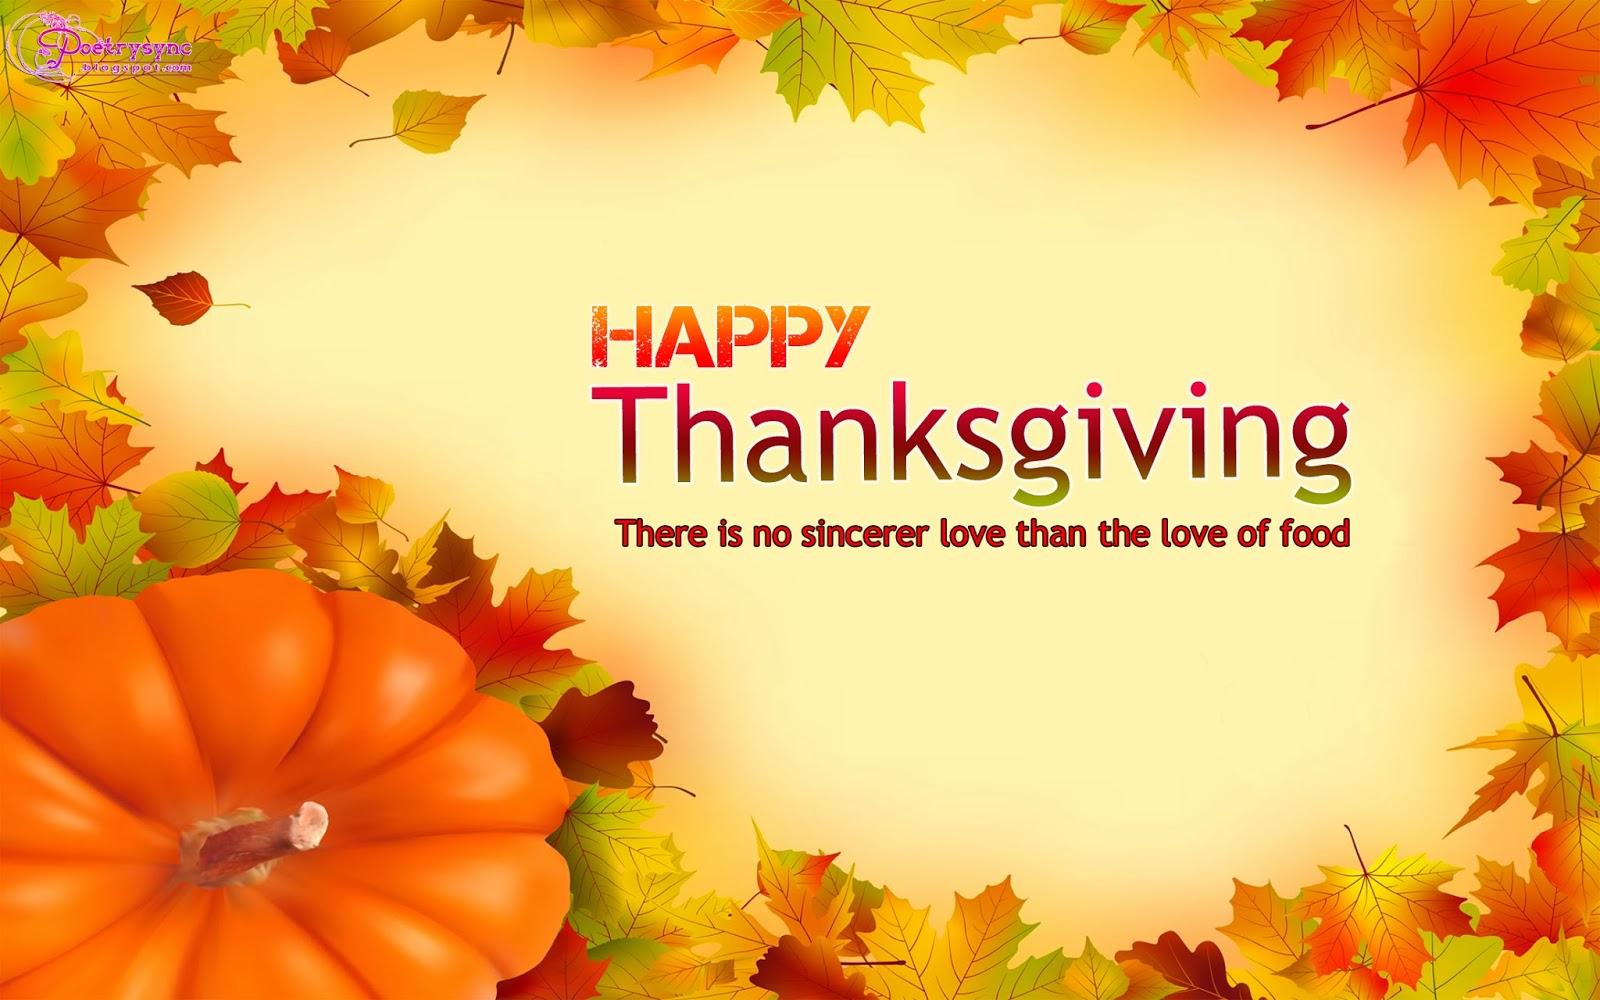 Thanksgiving Greetings Archives. Happy Thanksgiving Image